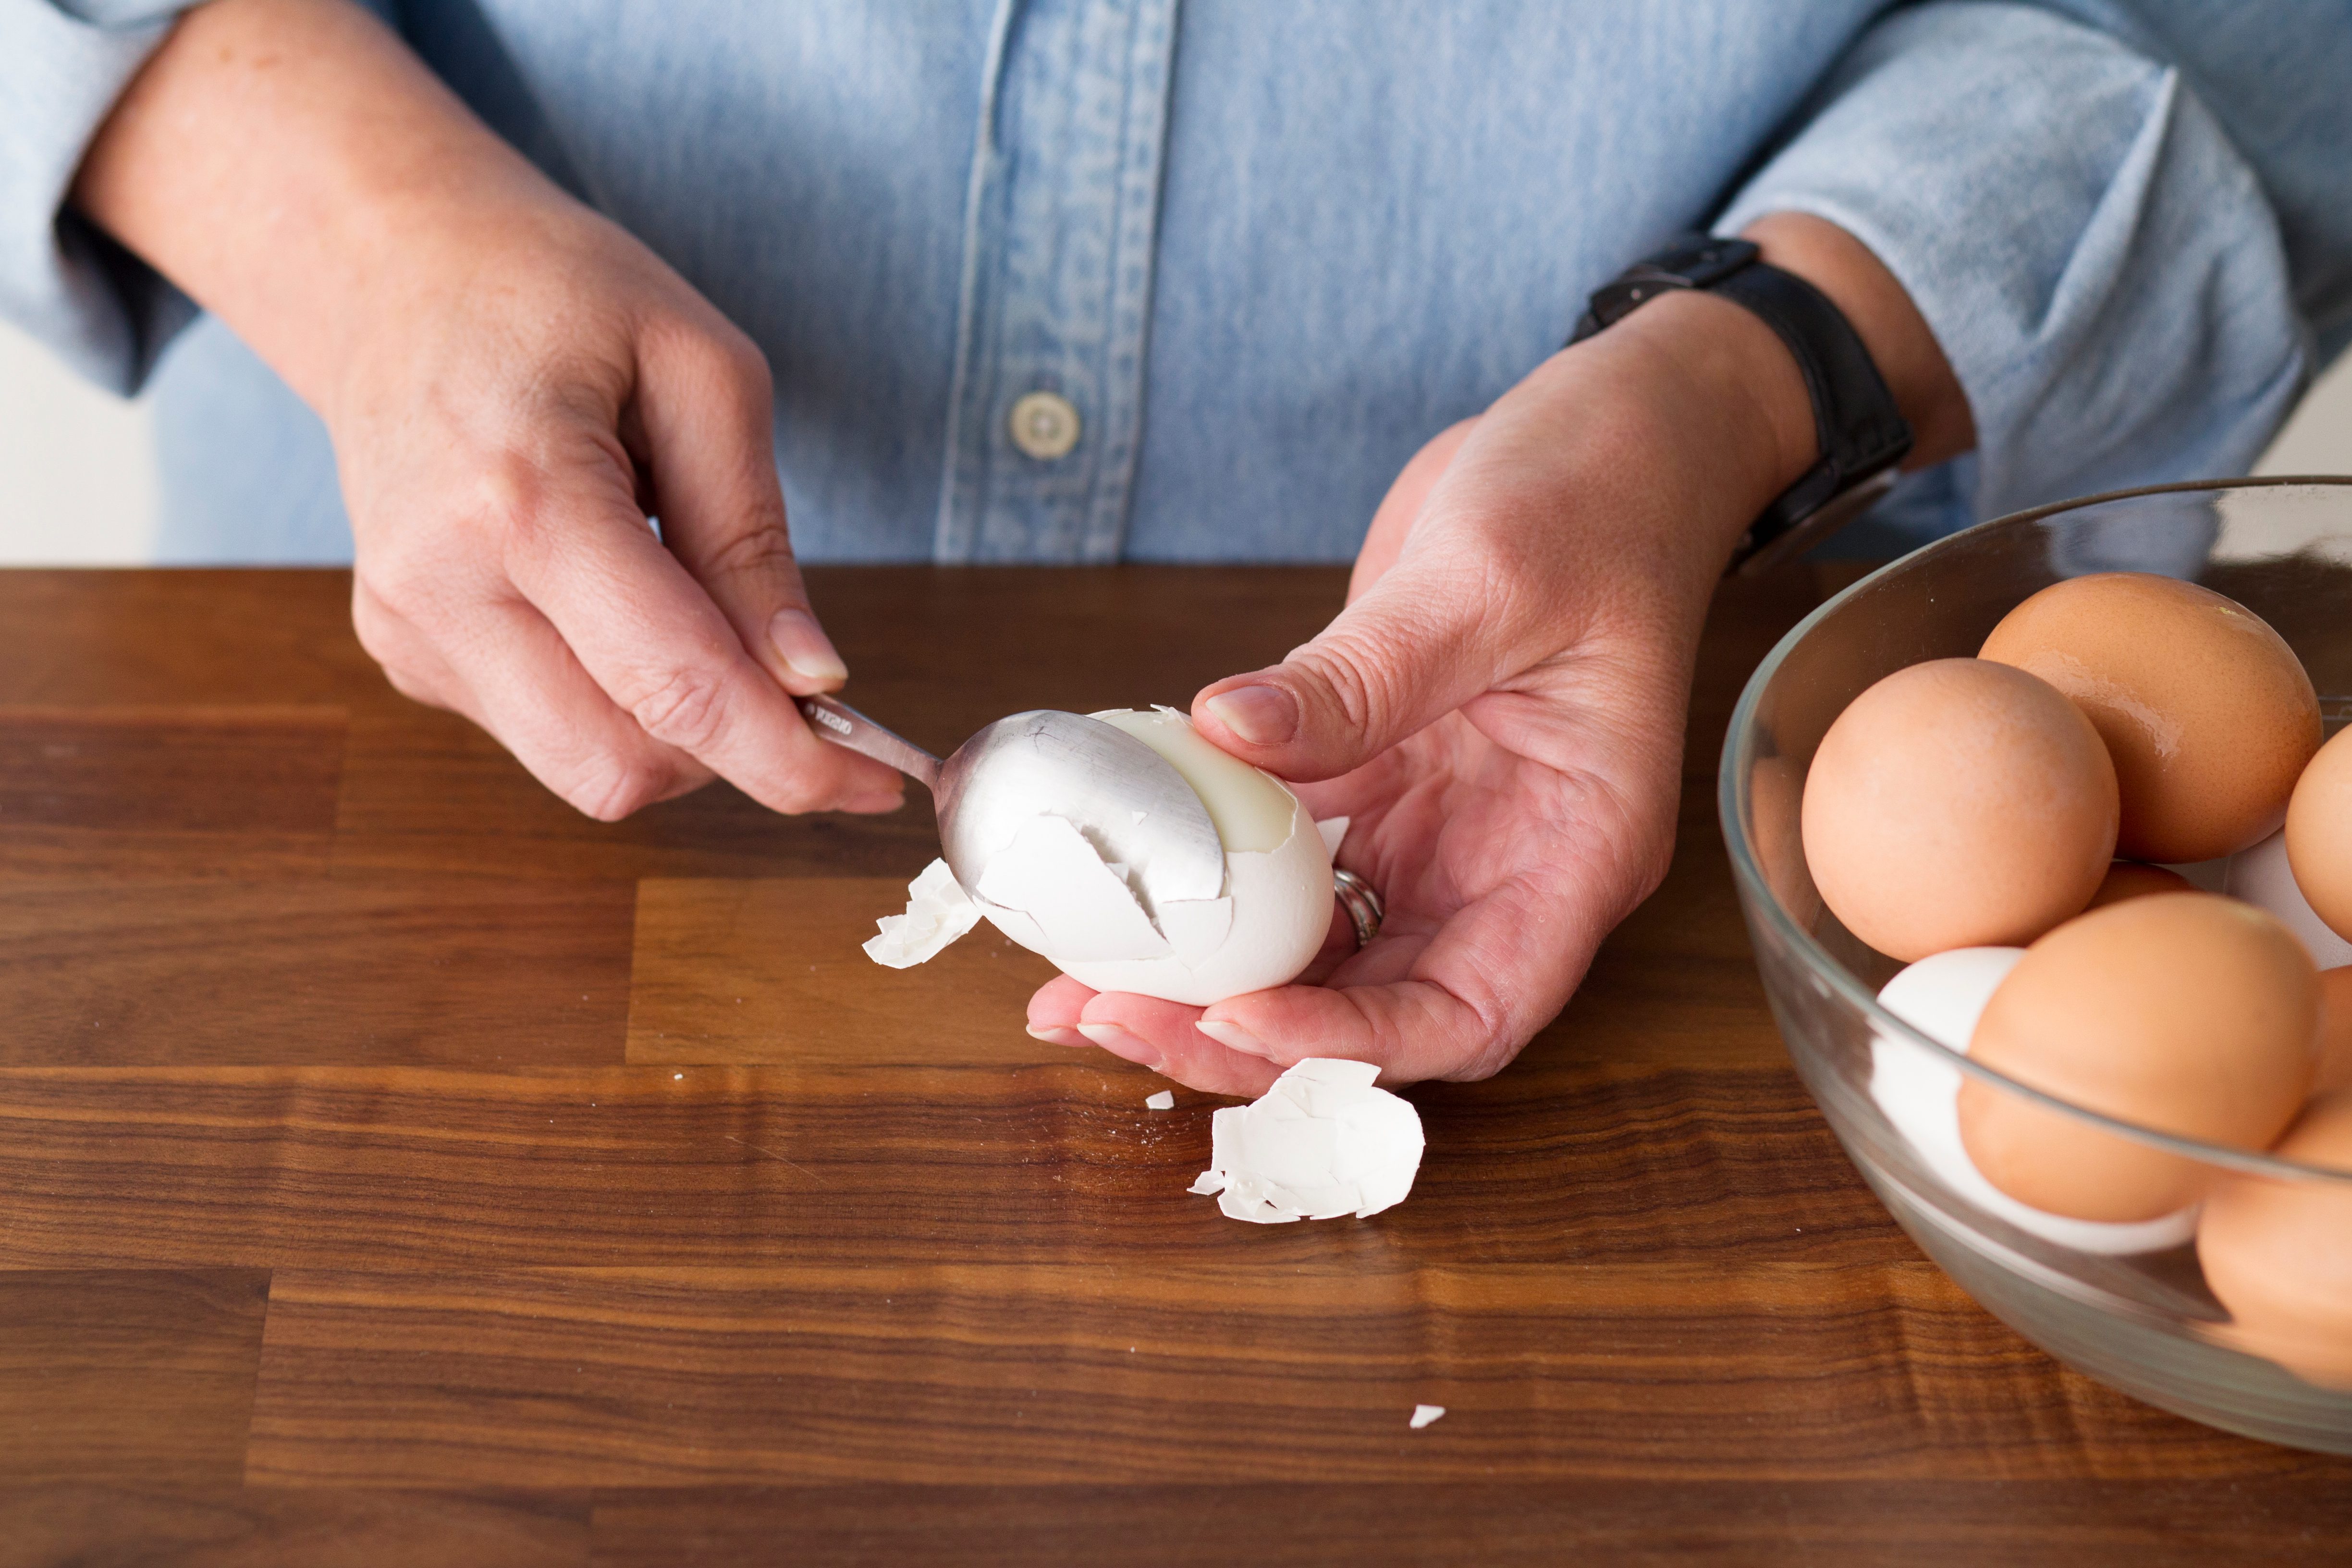 Person using a spoon to carefully remove the shell from a hard boiled egg